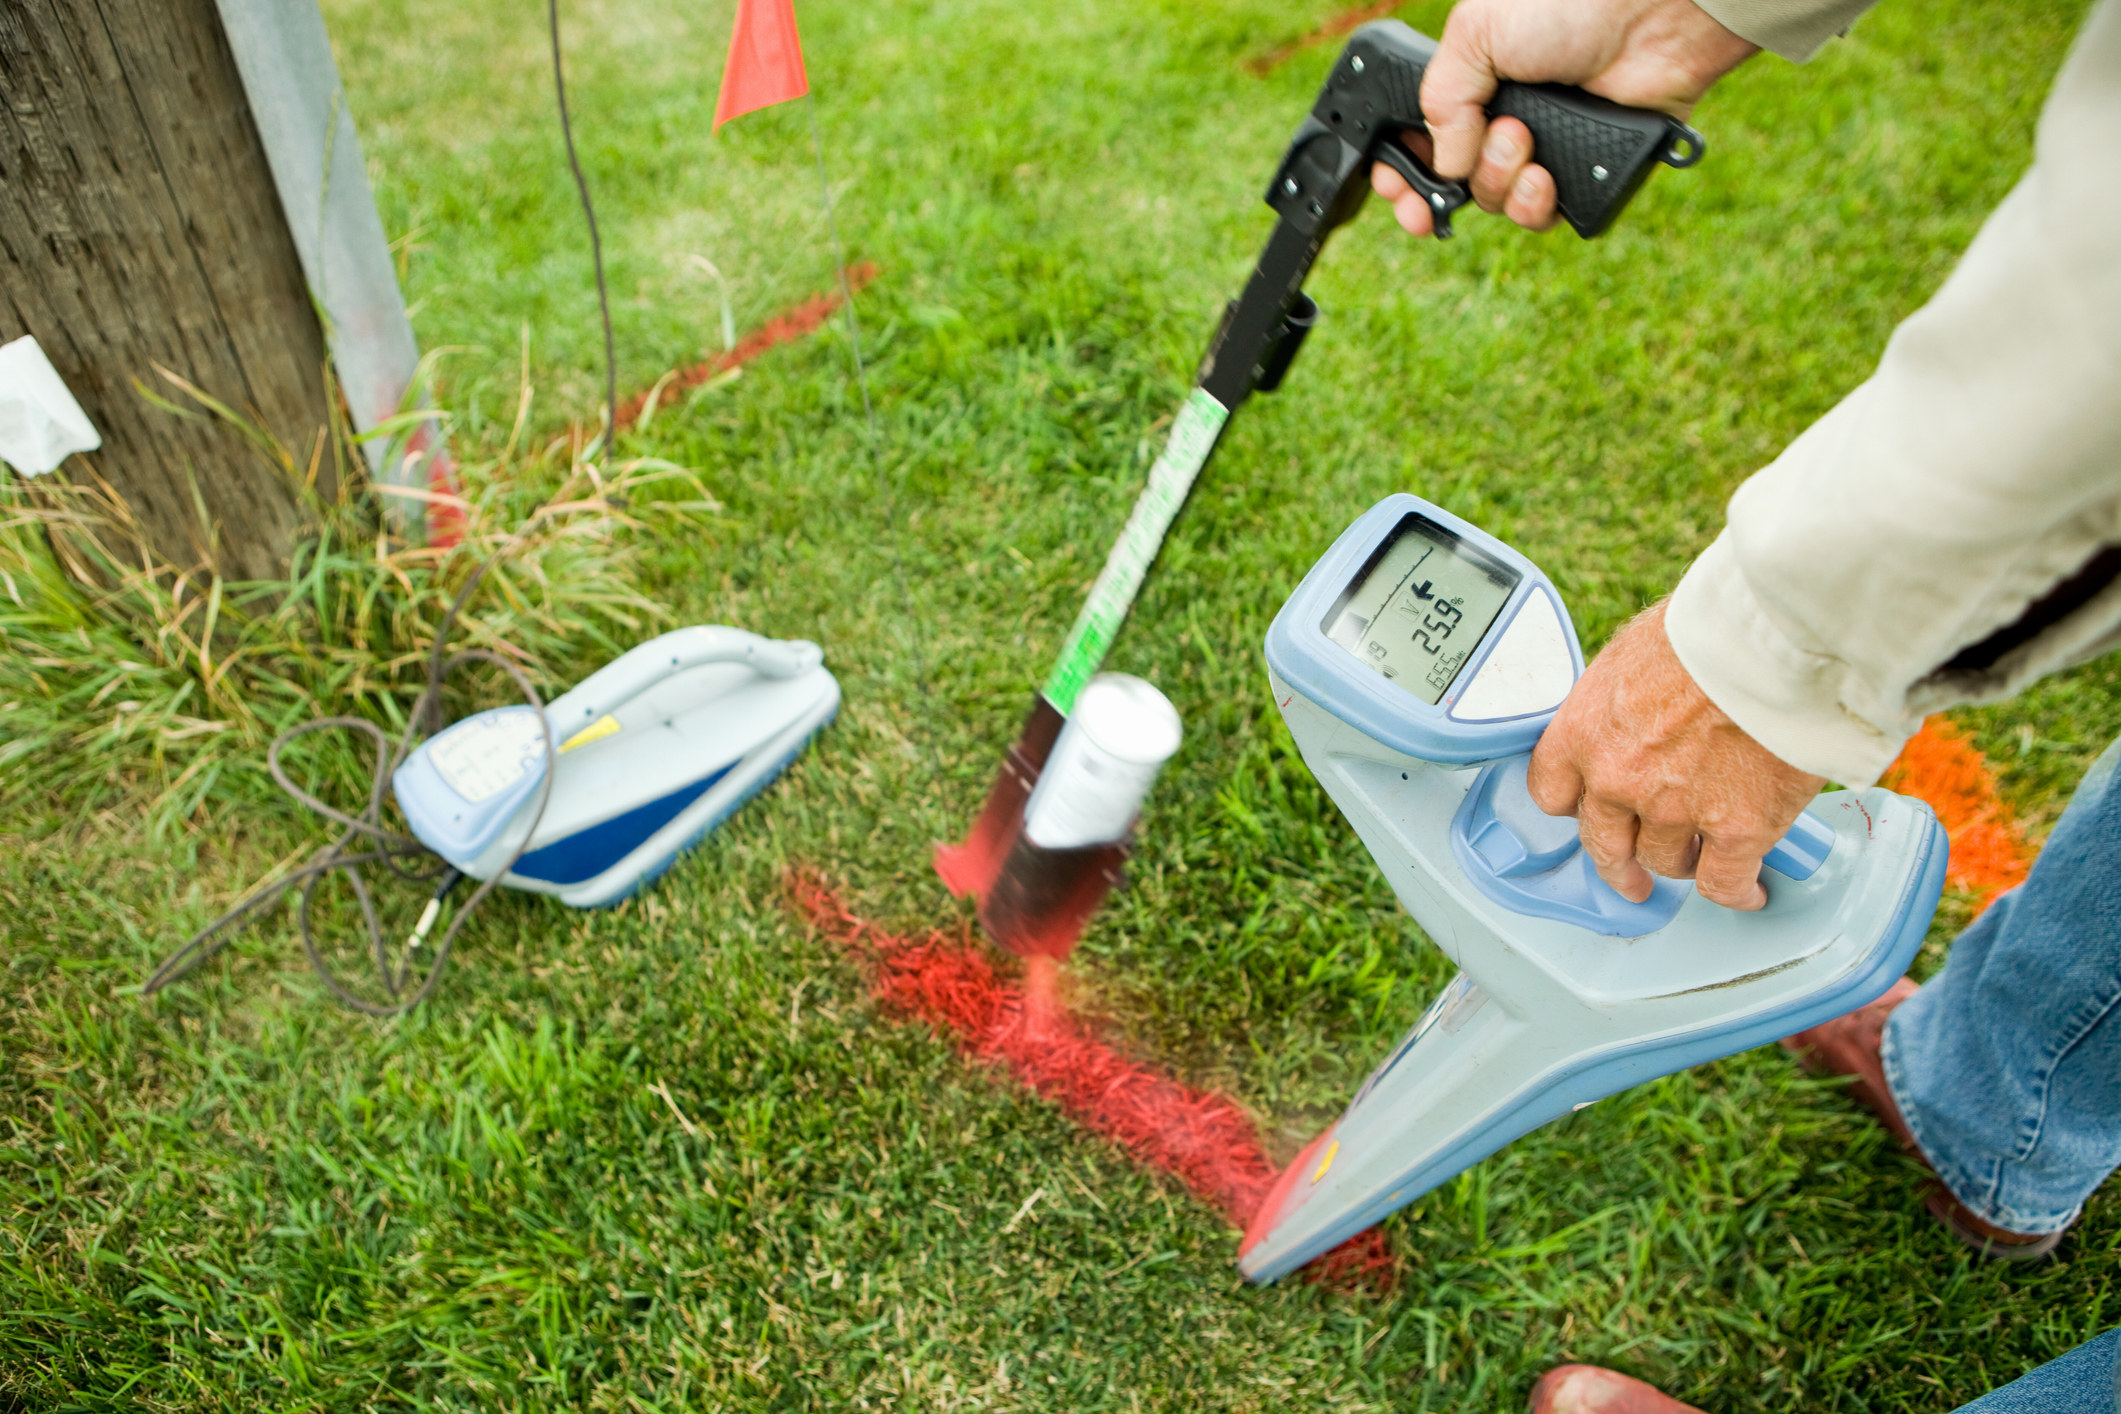 A person using a machine on their grass to locate utilities